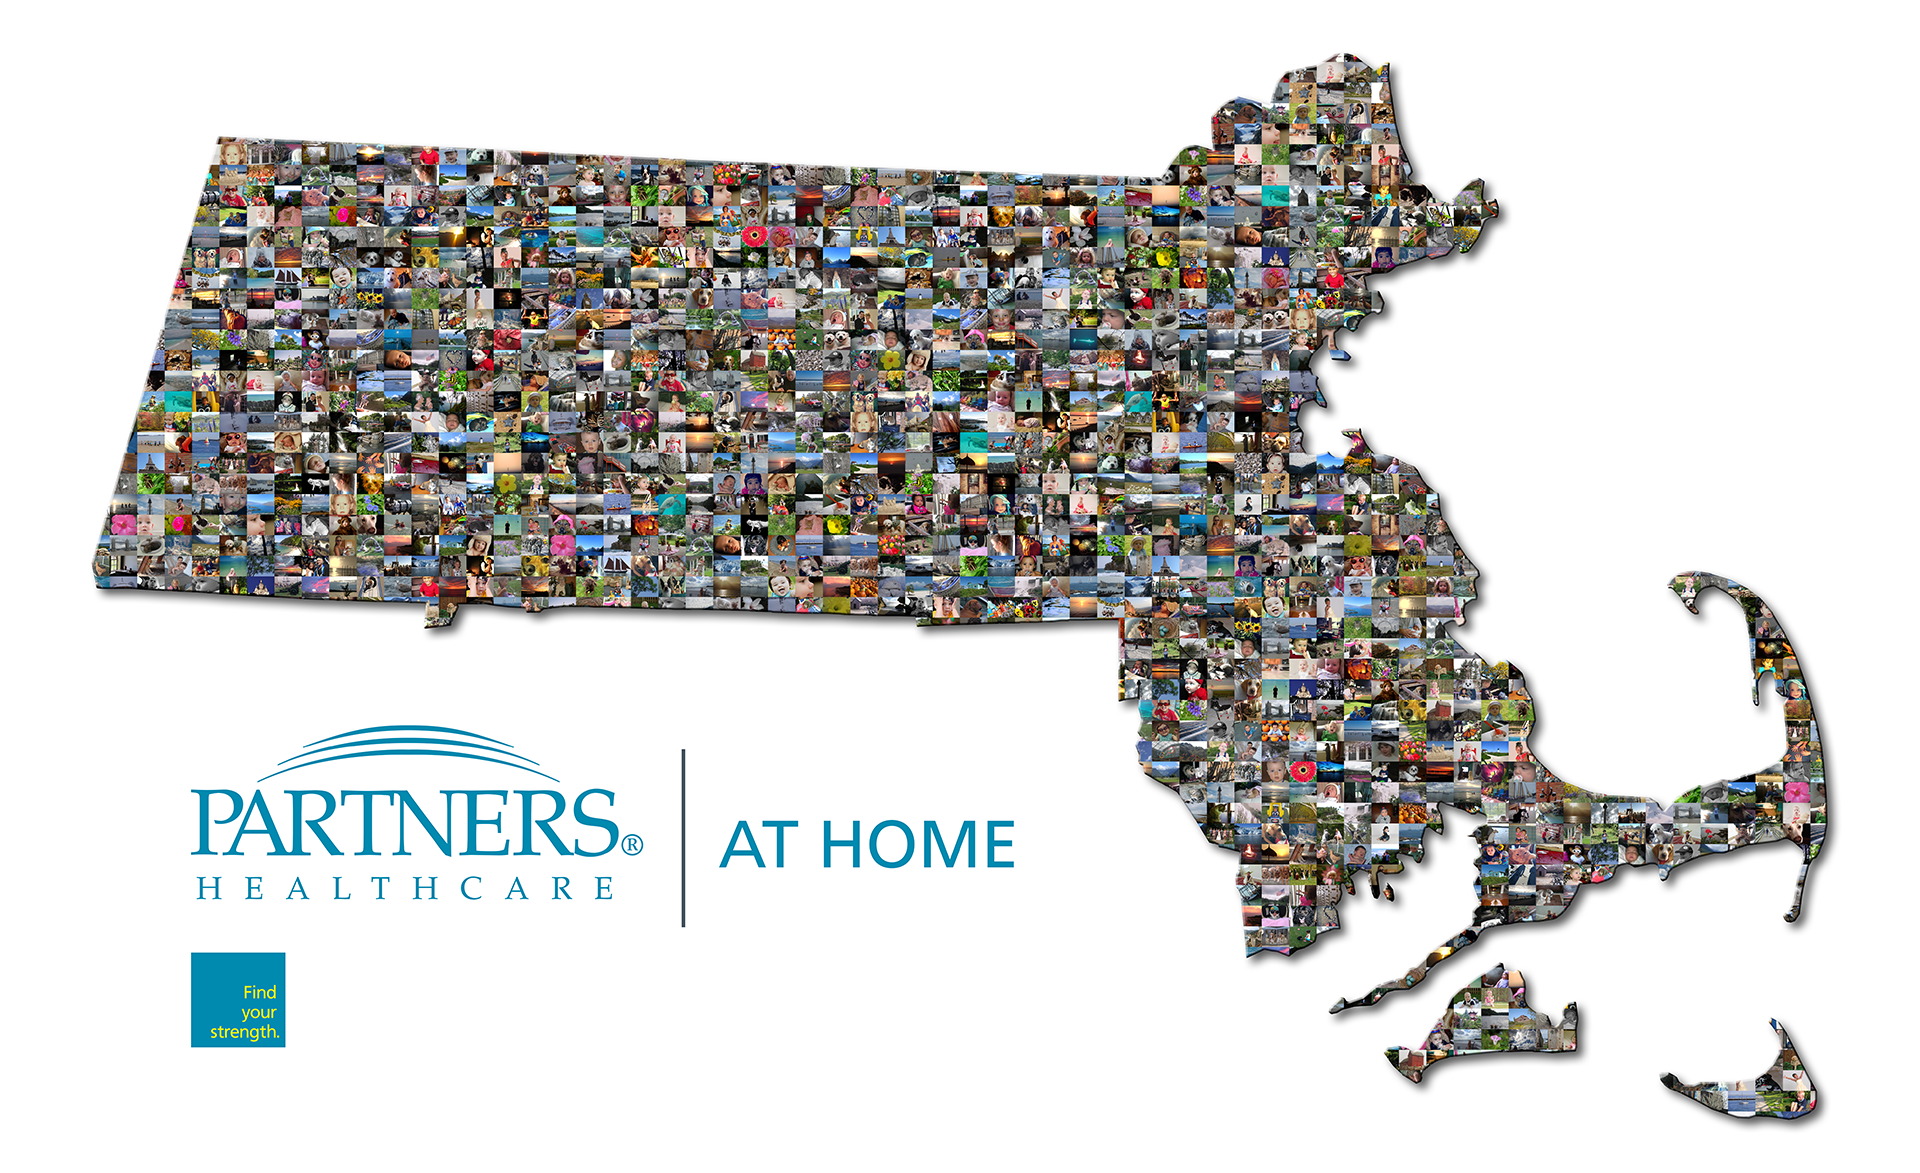 photo mosaic this Partner's Healthcare mosaic was created using over 500 community photos